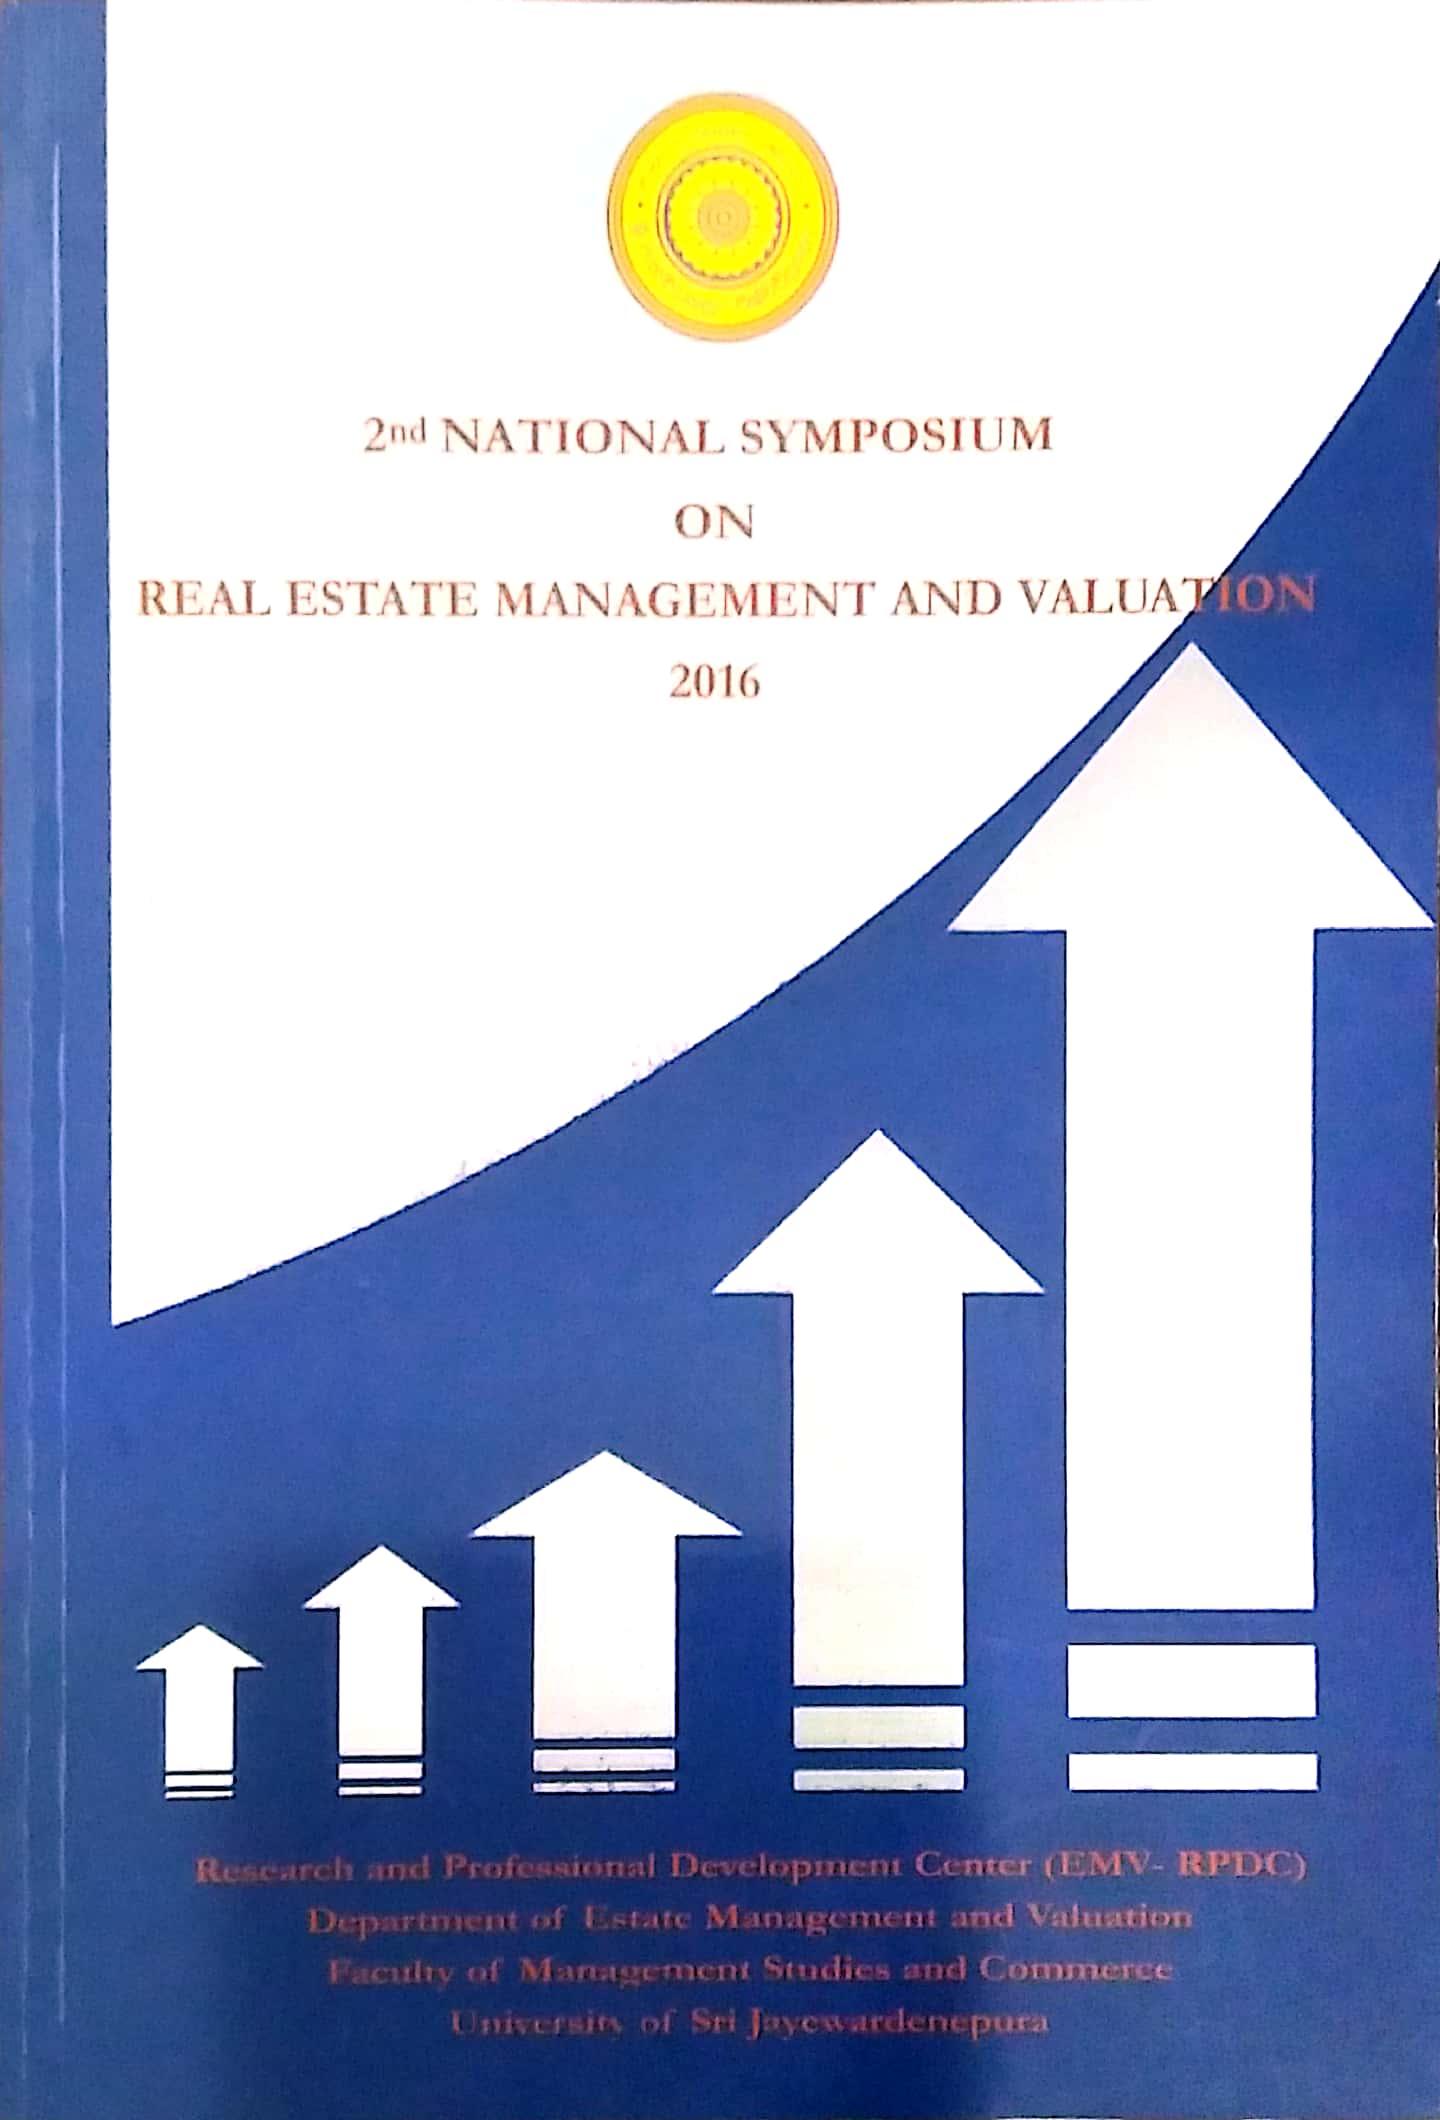 The 2nd National Symposium on Real Estate Management and Valuation.